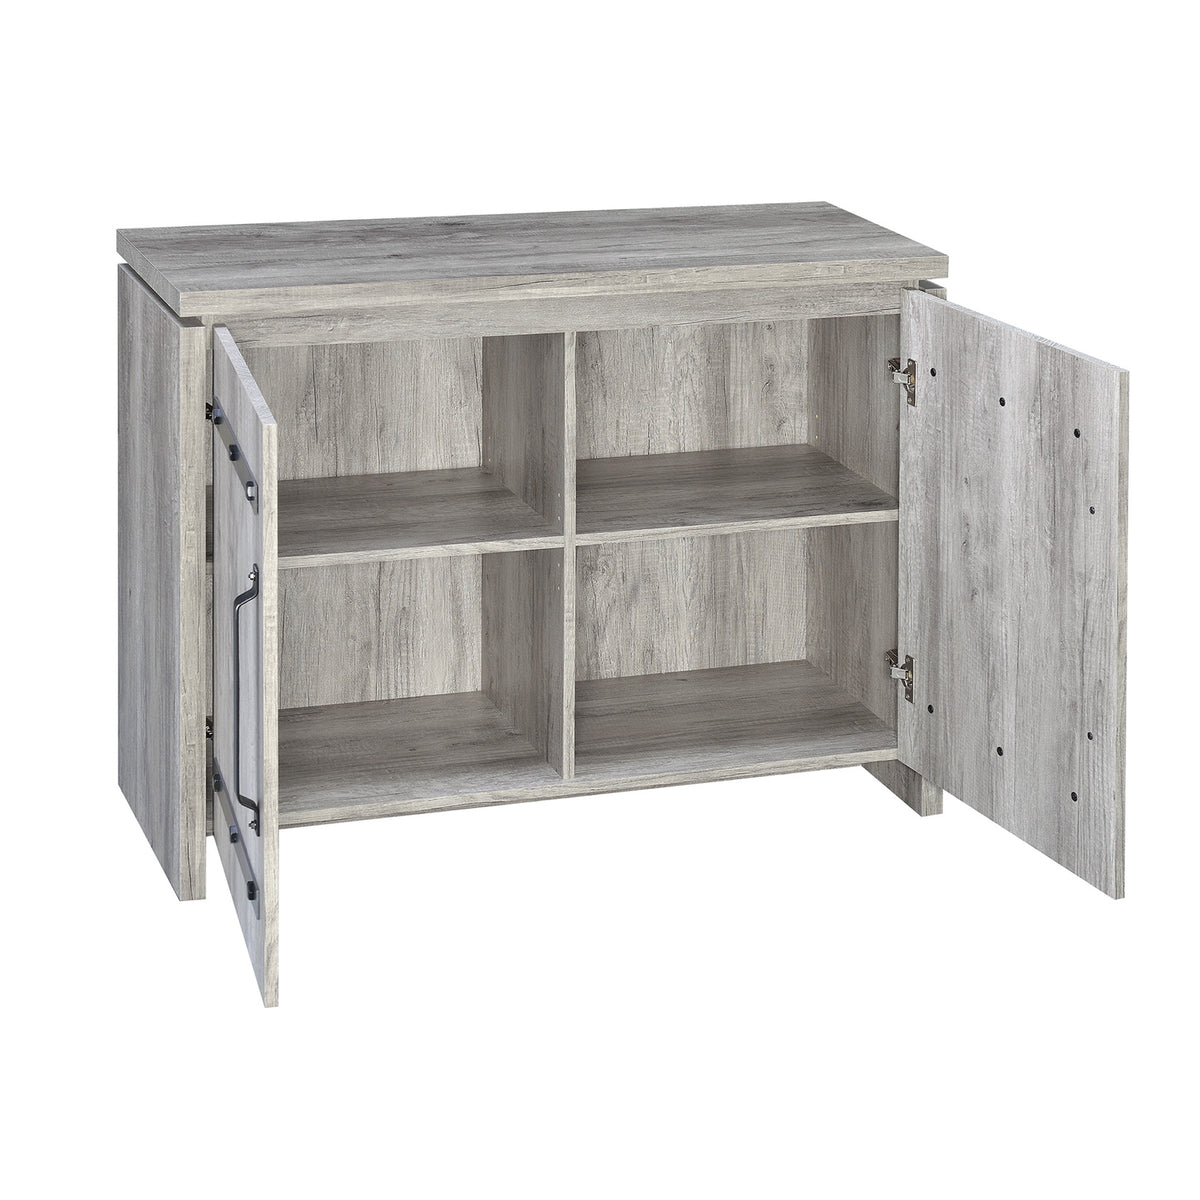 BM160269 Spacious Wooden Accent Cabinet, Gray